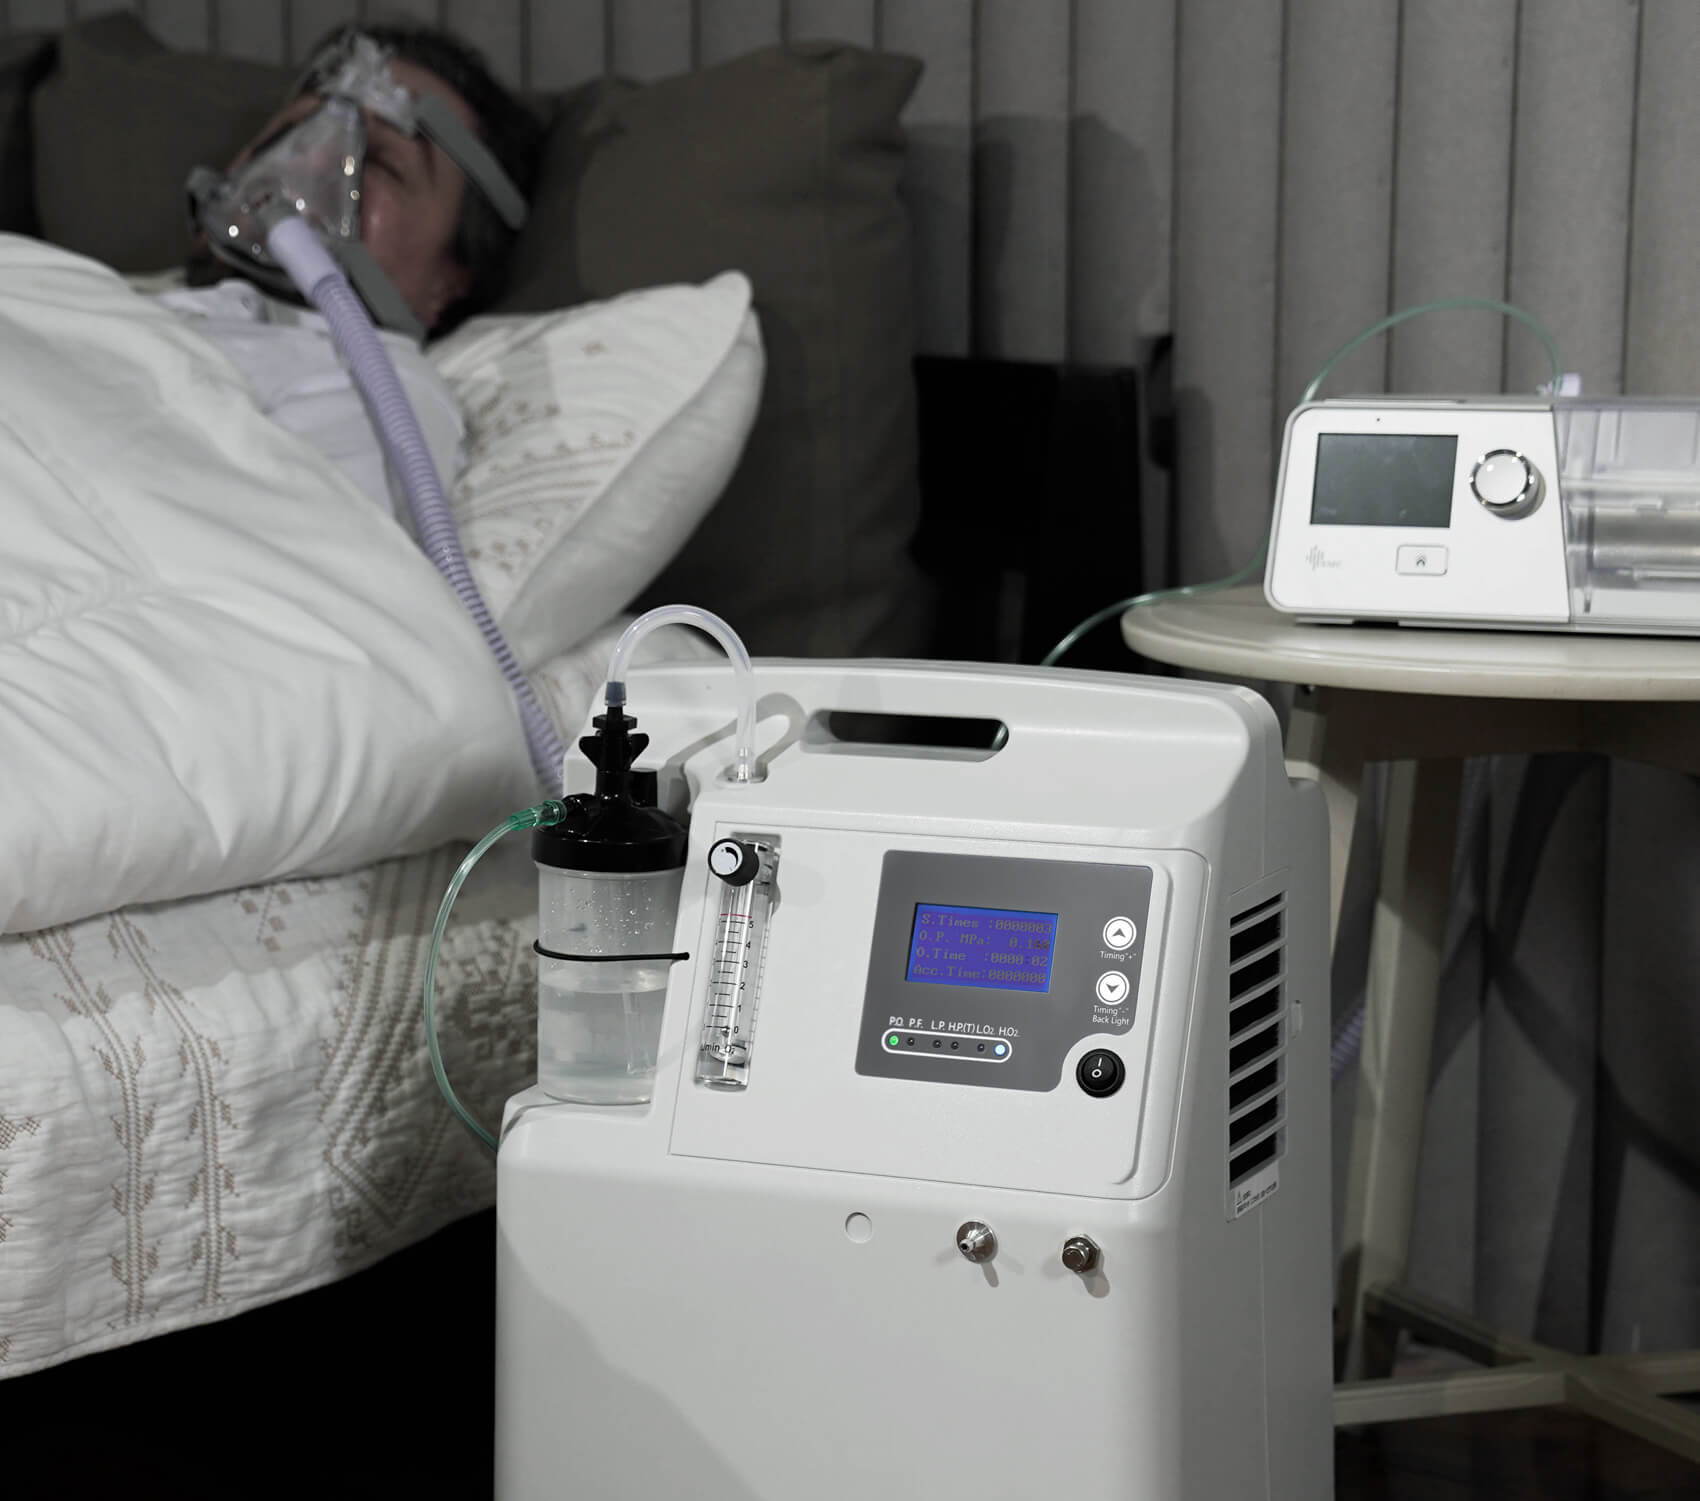 BiPAP Machine and Oxygen Concentrator